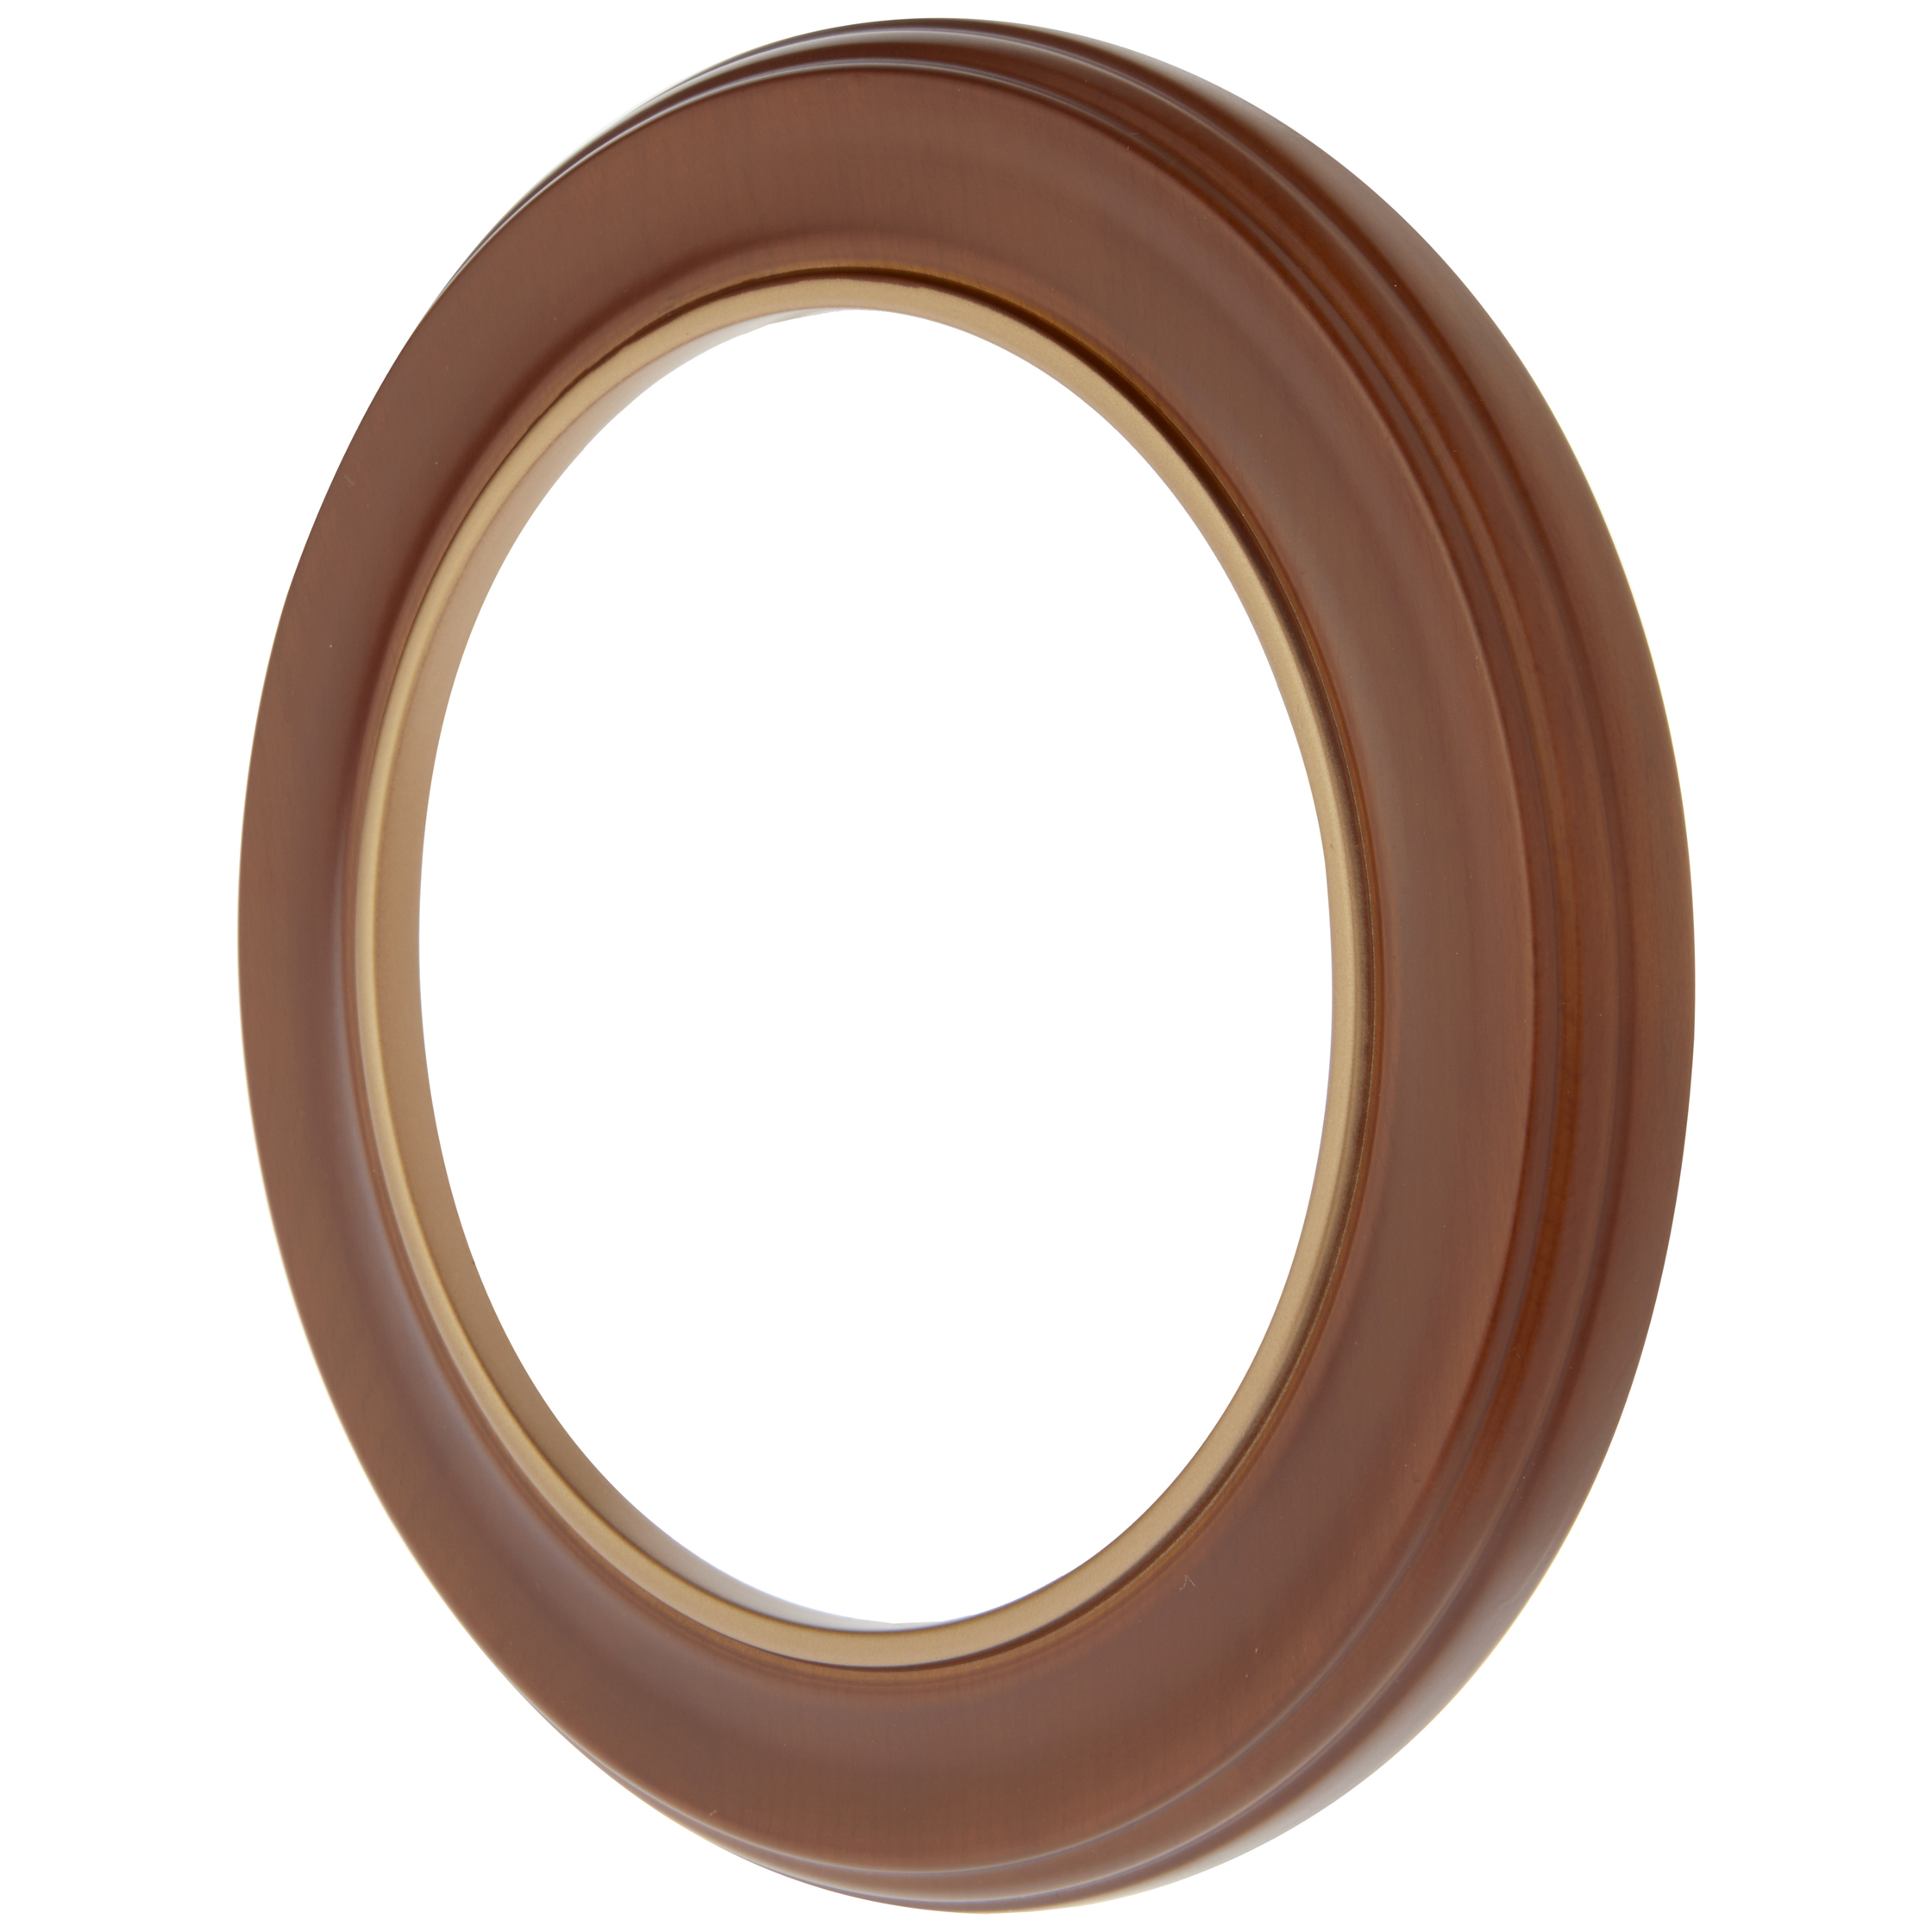 Bard's Walnut Wall Mountable Plate Frame with Gold Strip, 10.25" H x 10.25" W x 0.875" D (For 7.5" - 8.25" Plates)